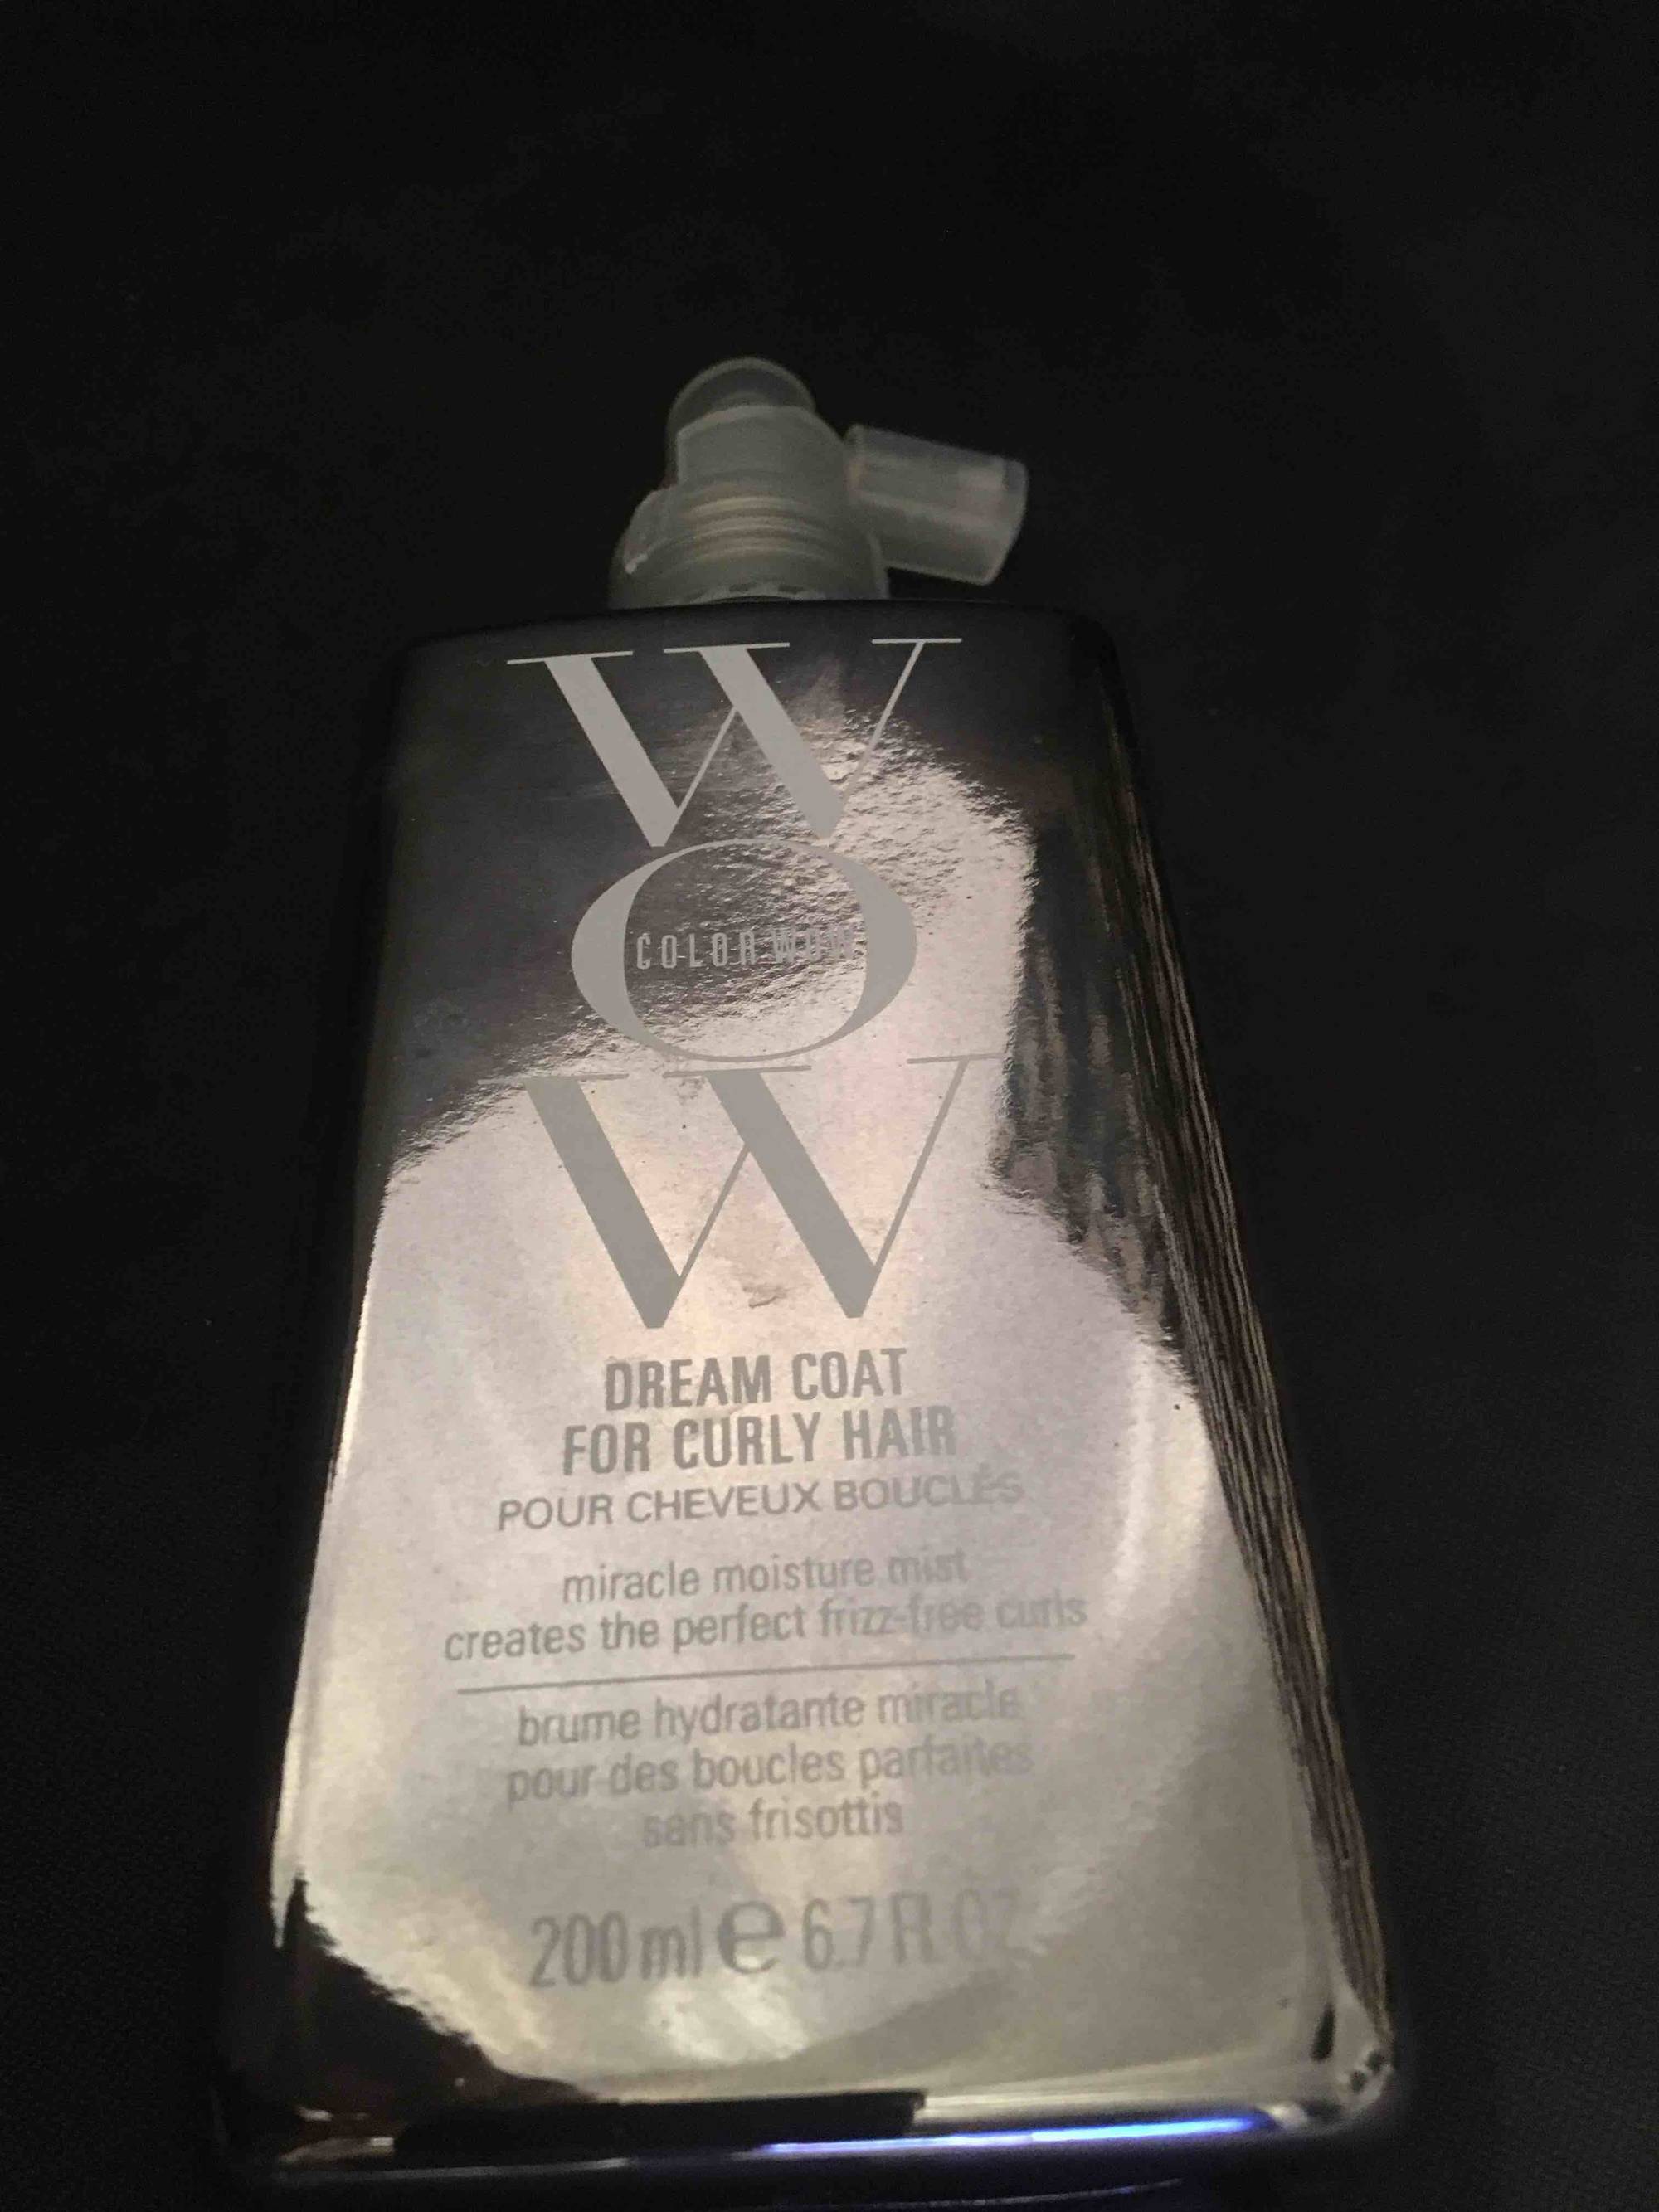 COLOR WOW - Dream coat - Brume hydratante miracle